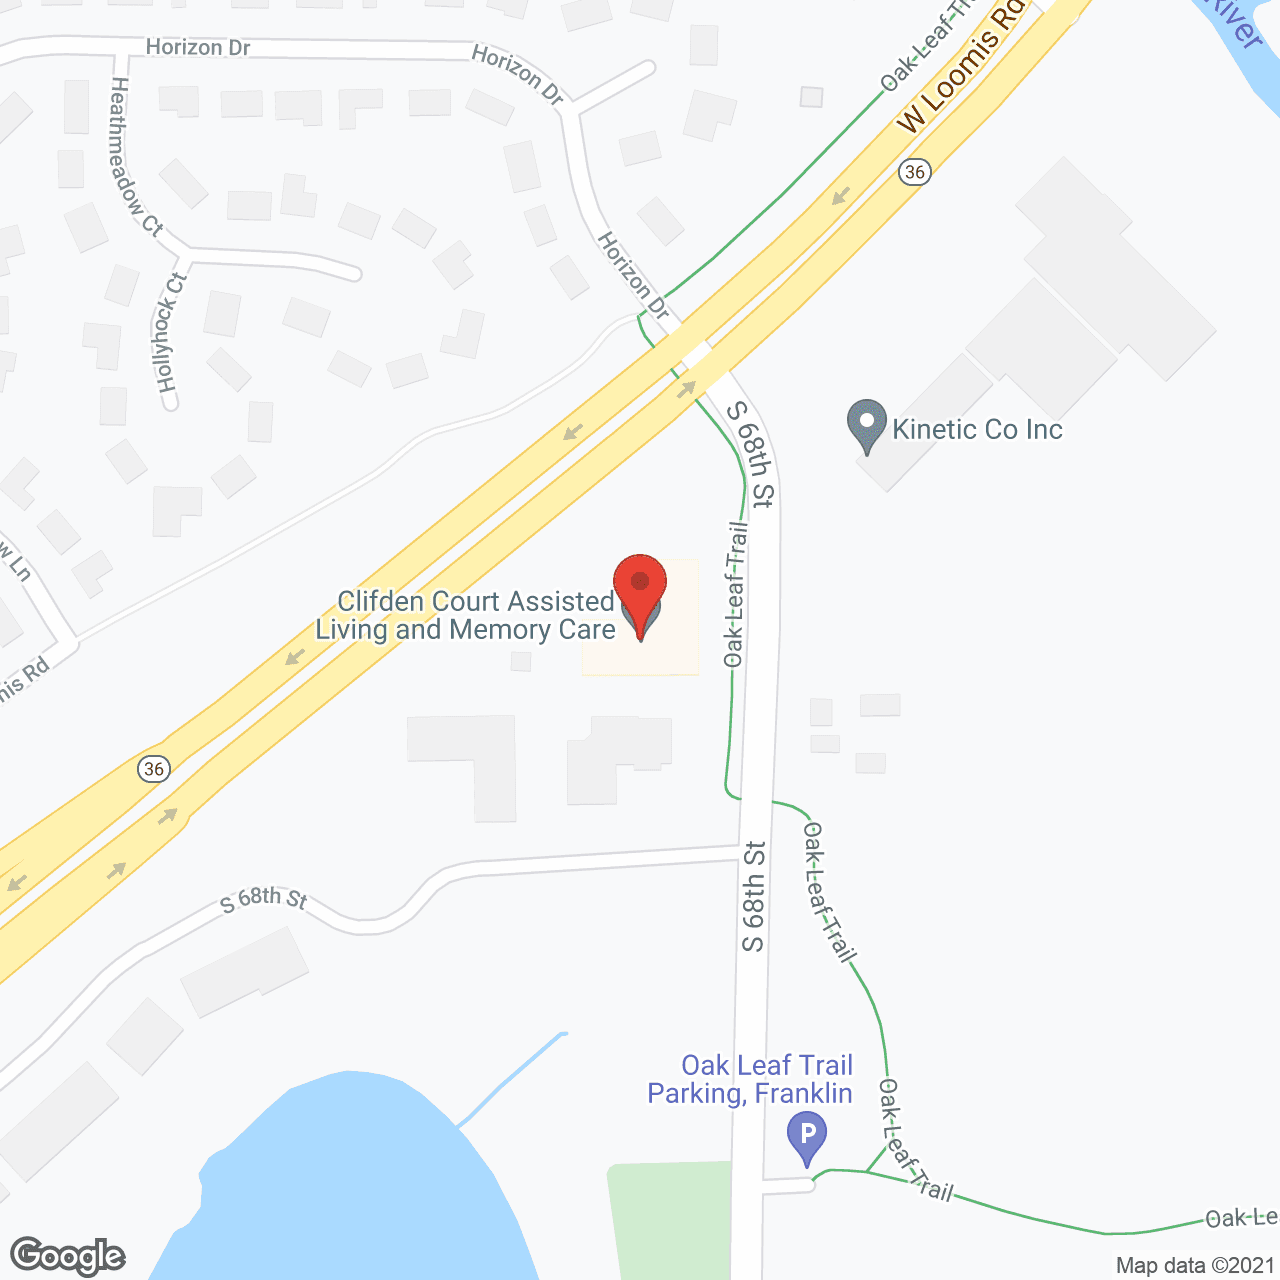 Clifden Court Assisted Living and Memory Care in google map